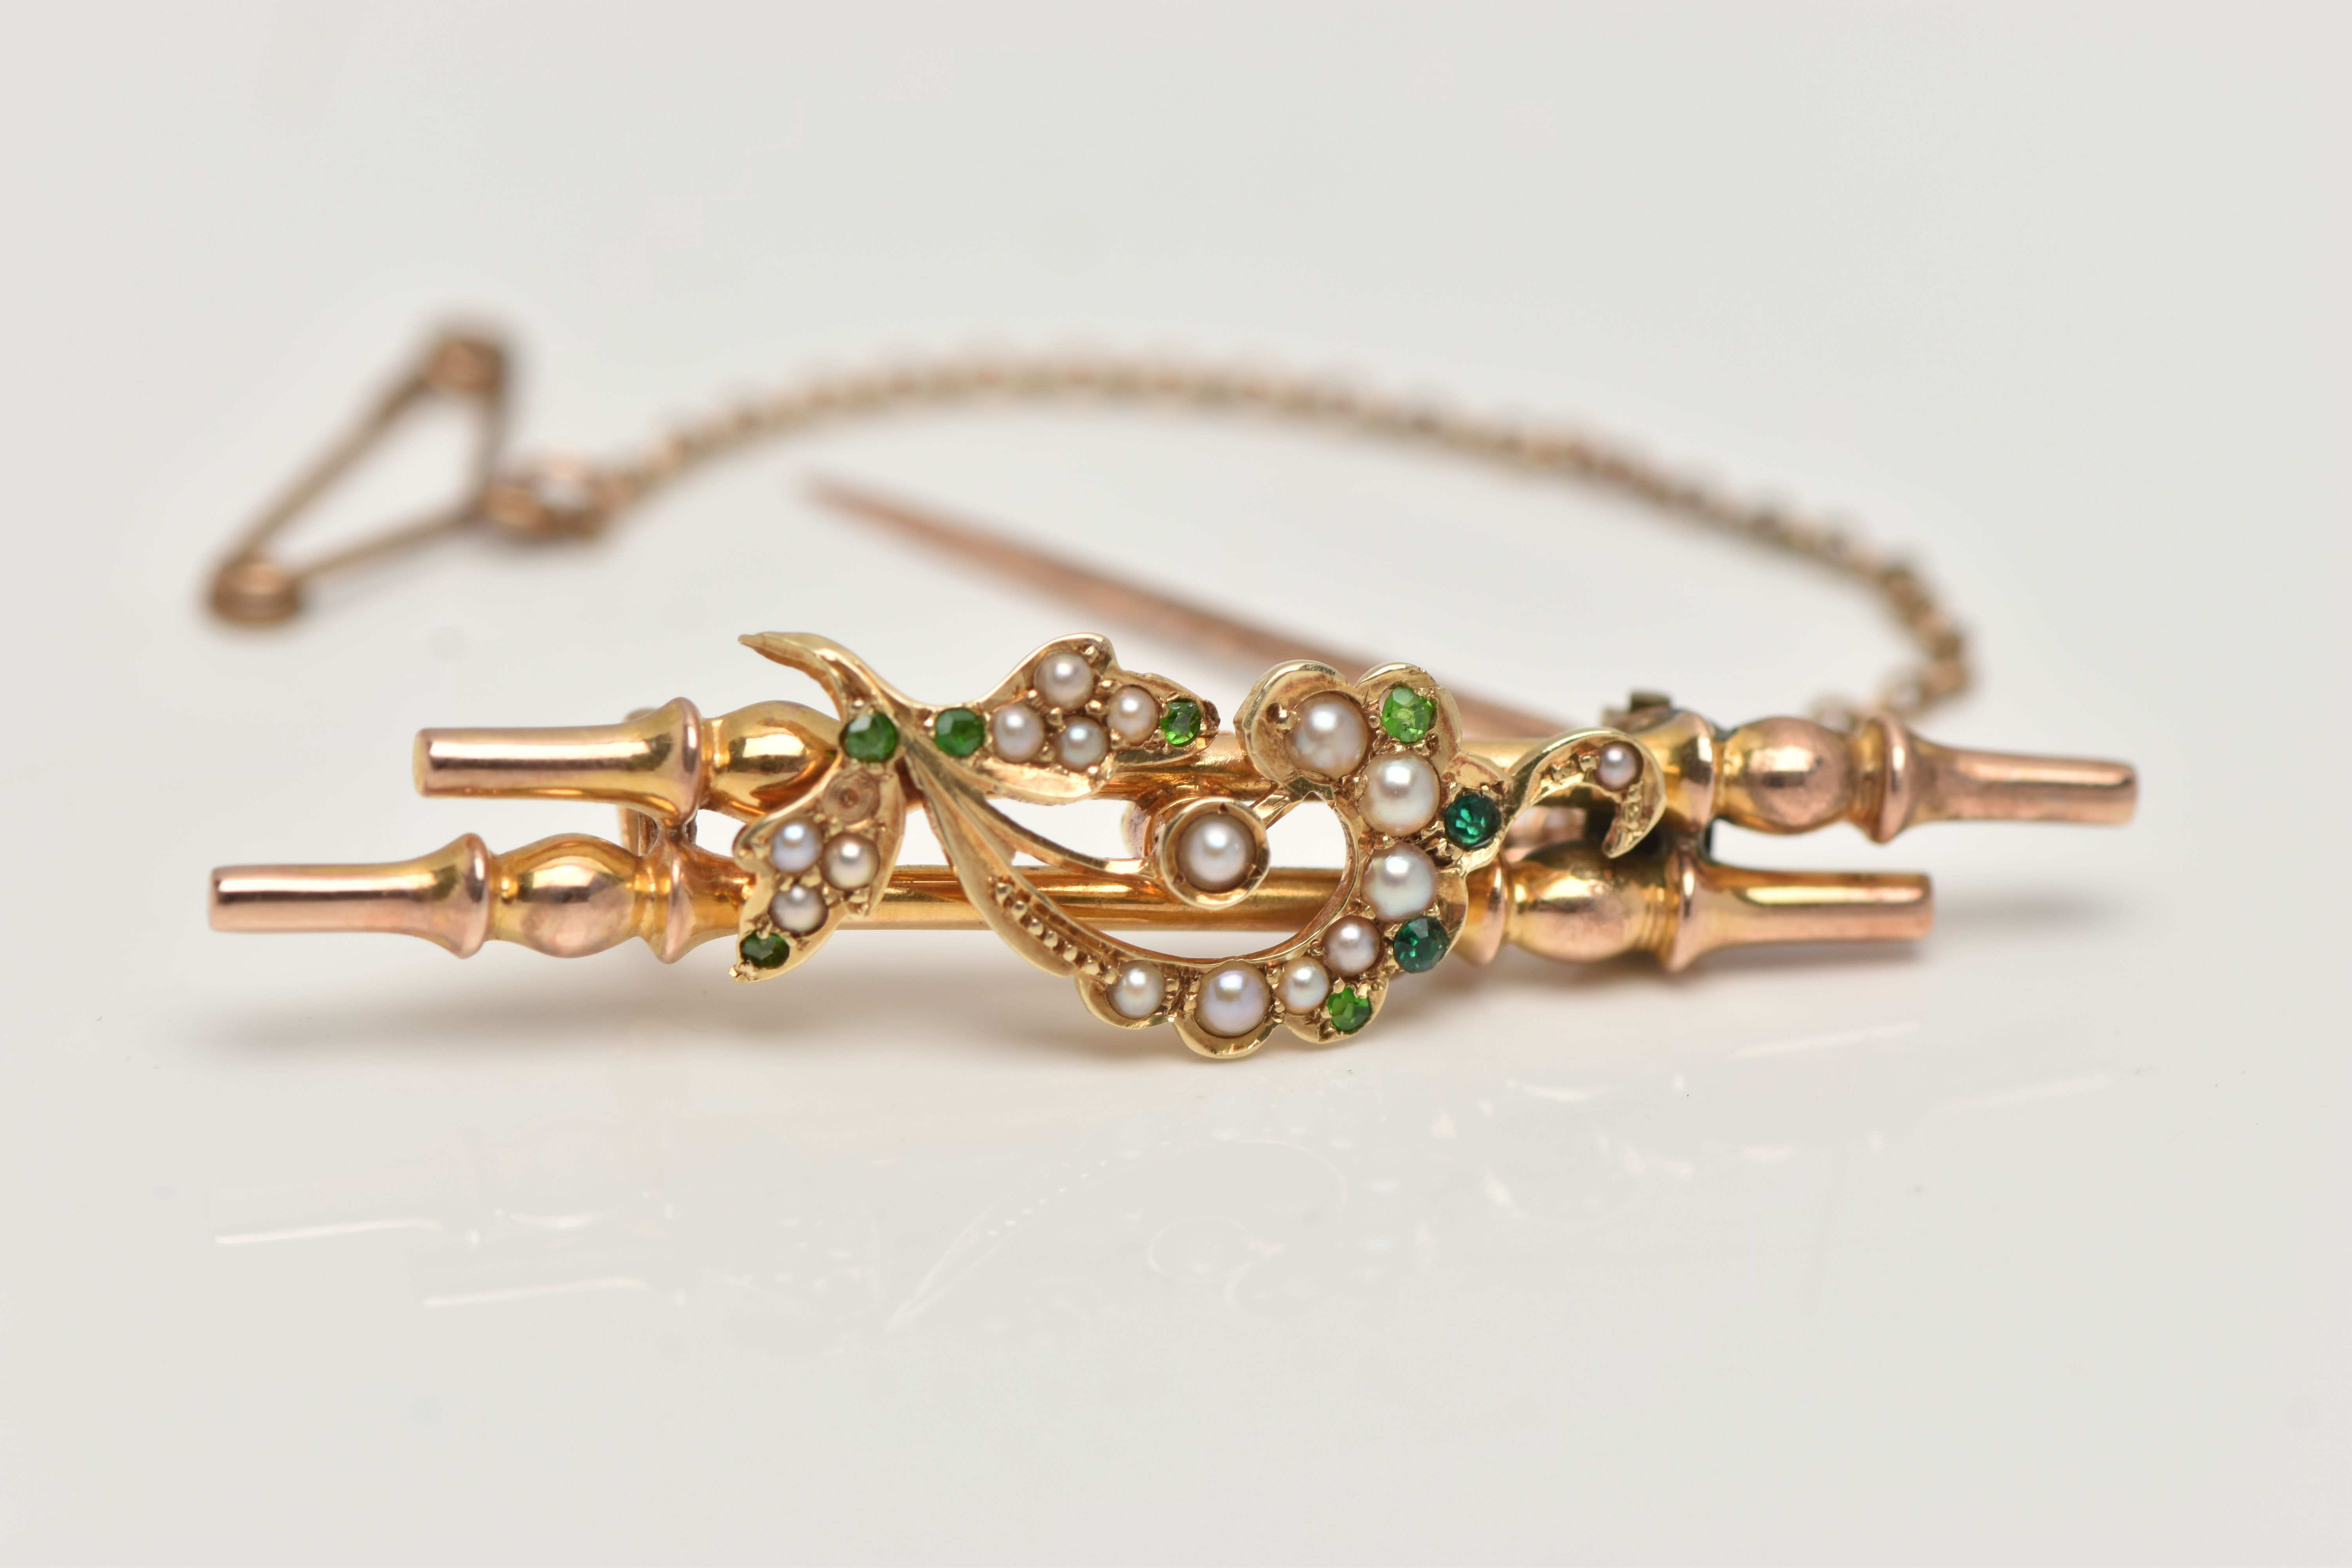 A YELLOW METAL BROOCH, double bar brooch with floral detailing, set with green stones assessed as